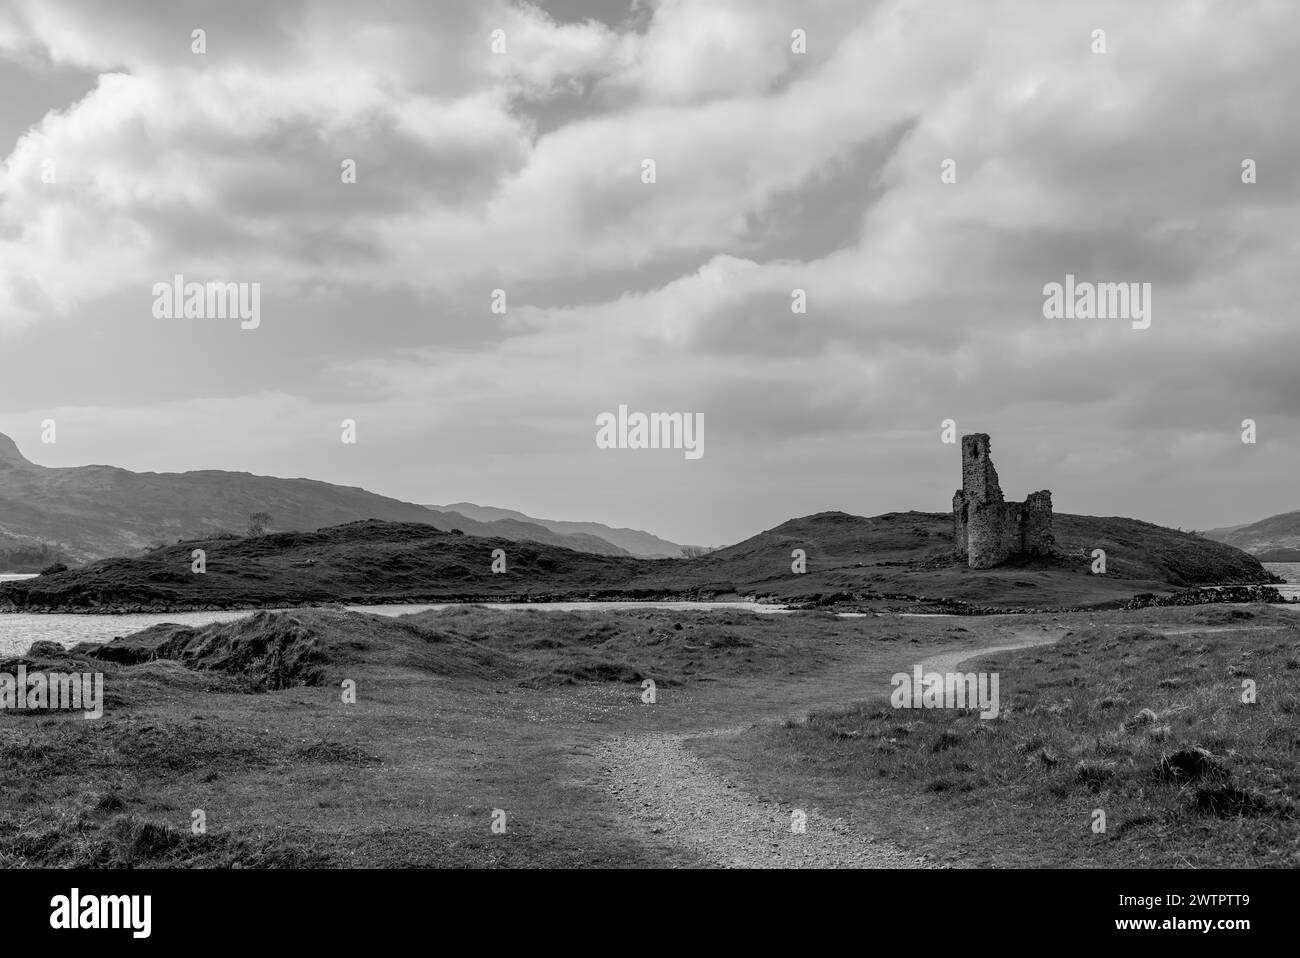 A black and white image capturing the serene landscape of Ardvreck Castle ruins, nestled amidst the rugged terrain of Scotland. The winding path leads Stock Photo